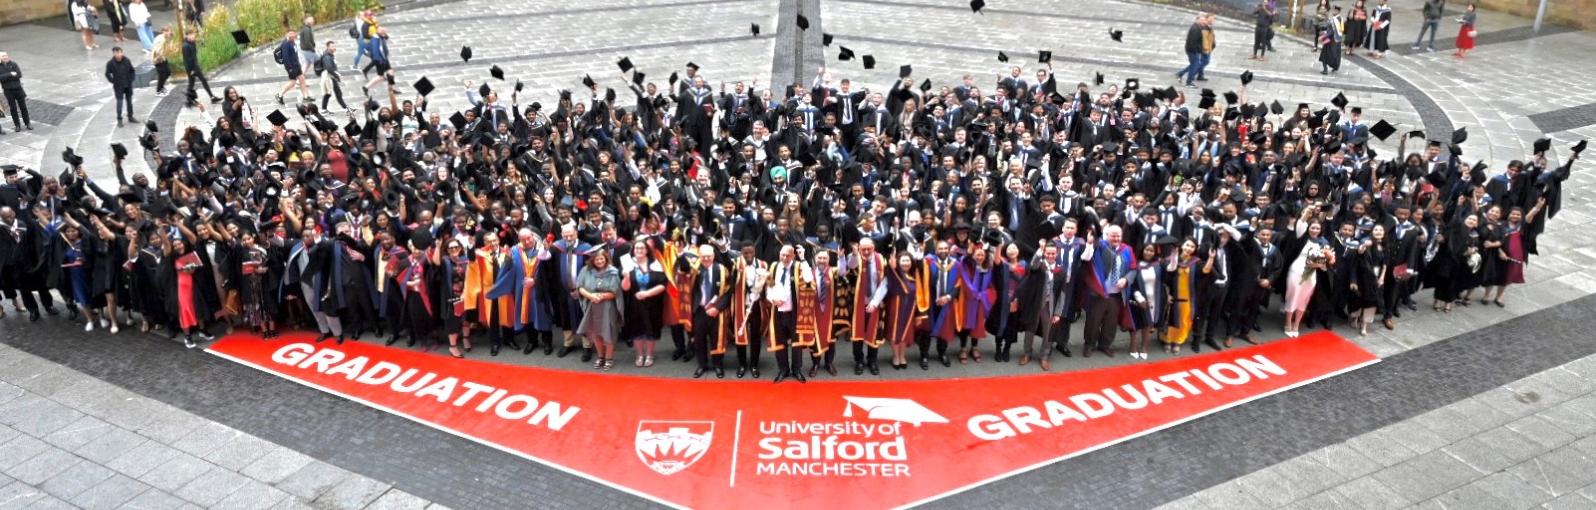 Large group of people posing for a photograph in graduation attire in front of floor sign that reads 'Salford University Manchester Graduation'. 